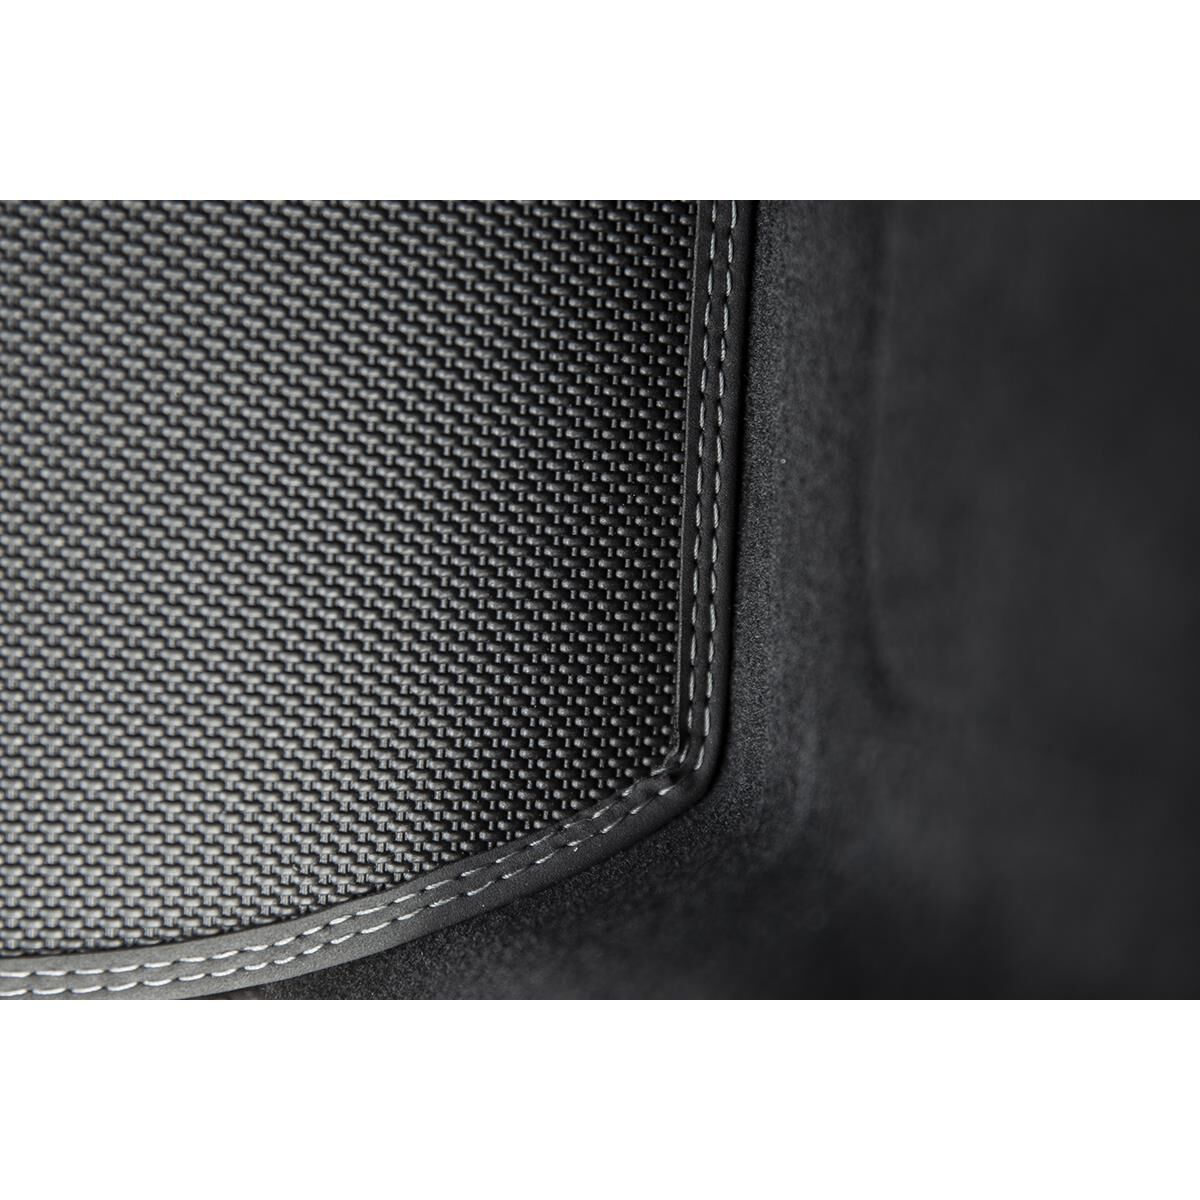 EXECUTIVE RUBBER BOOT LINER FOR BMW 5 SERIES (G30 SEDAN) 2017 ONWARDS, , scaau_hi-res